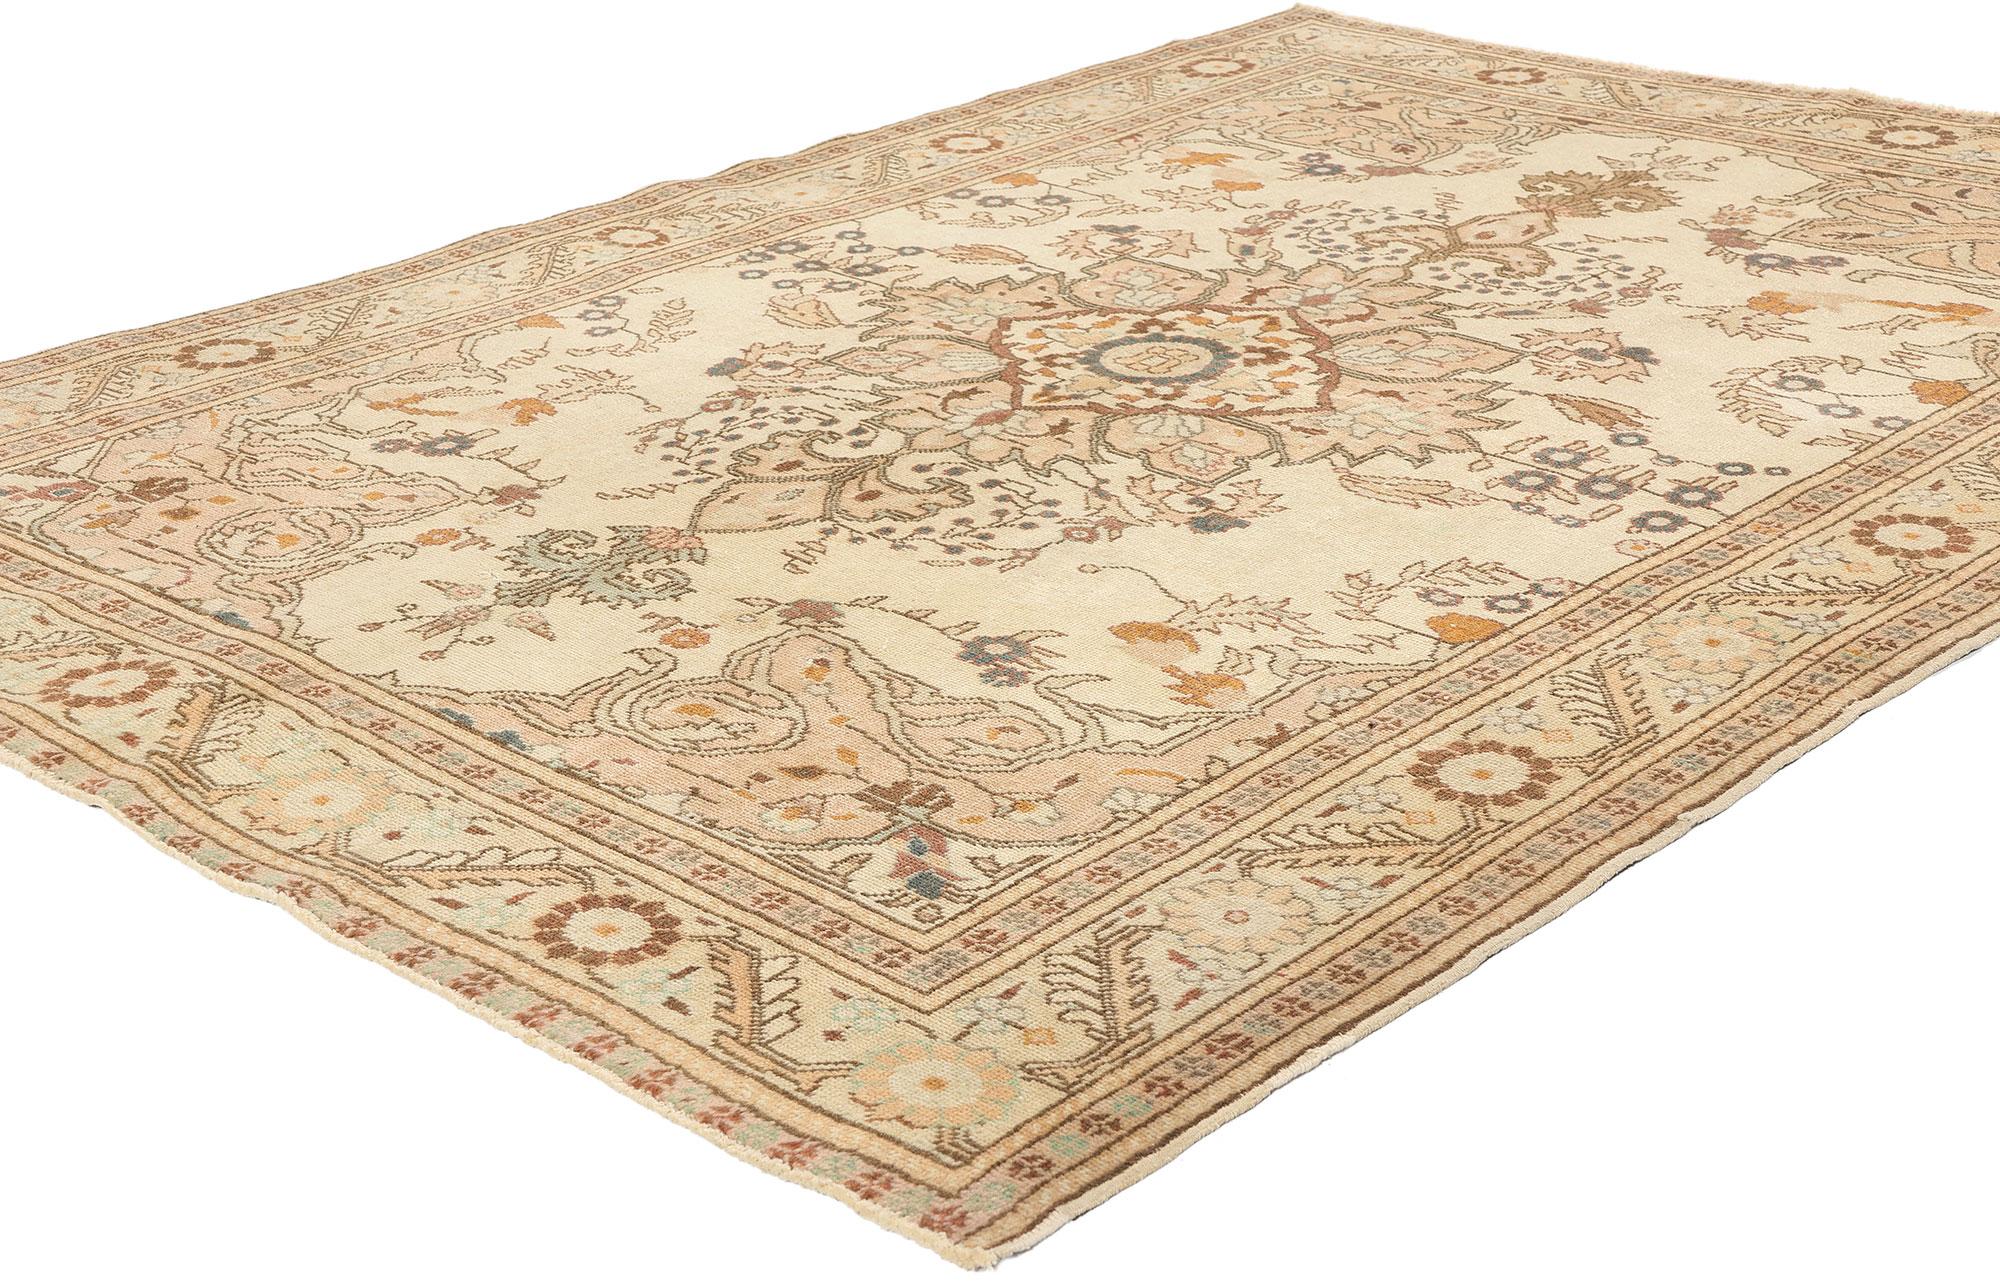 52133 Vintage Turkish Sivas Rug, 04’09 x 06’09. Turkish Sivas rugs, treated with a special antique-wash technique, are revered for their timeless allure and timeless aesthetic. Originating from Sivas, Turkey, these rugs boast a worn-in appearance